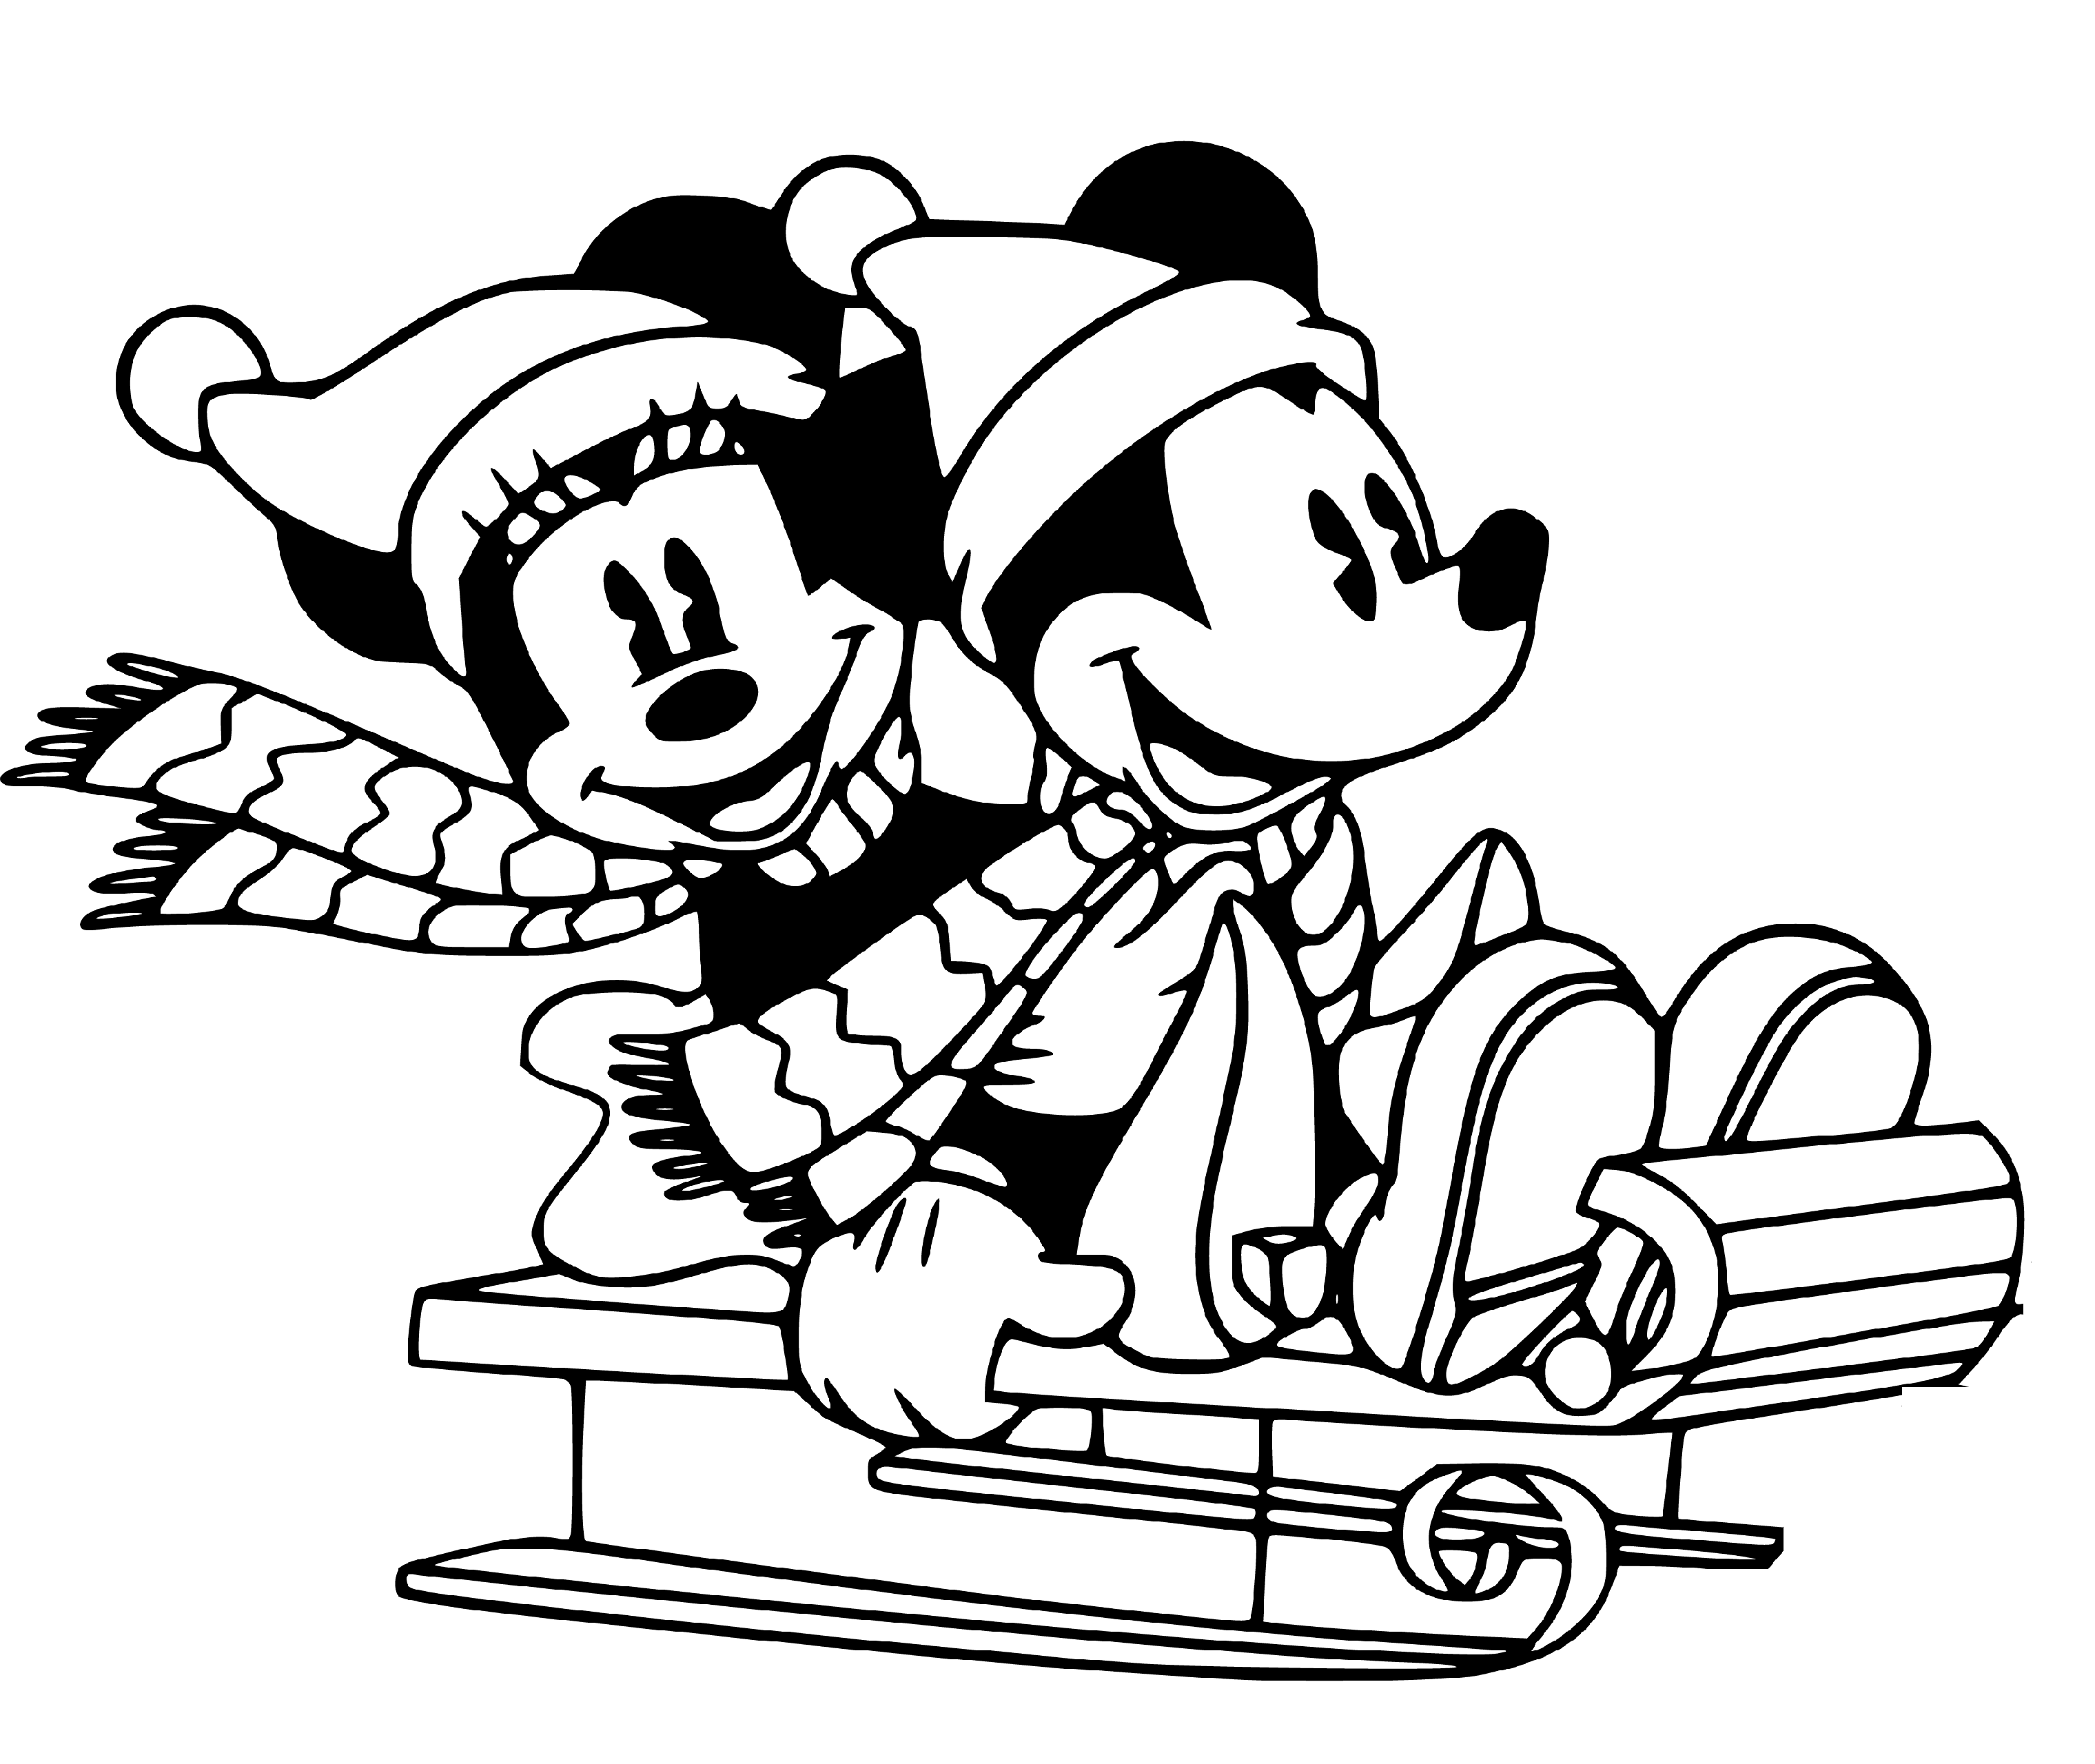 Minnie Mouse and Mickey having fun black white outline to color - SheetalColor.com